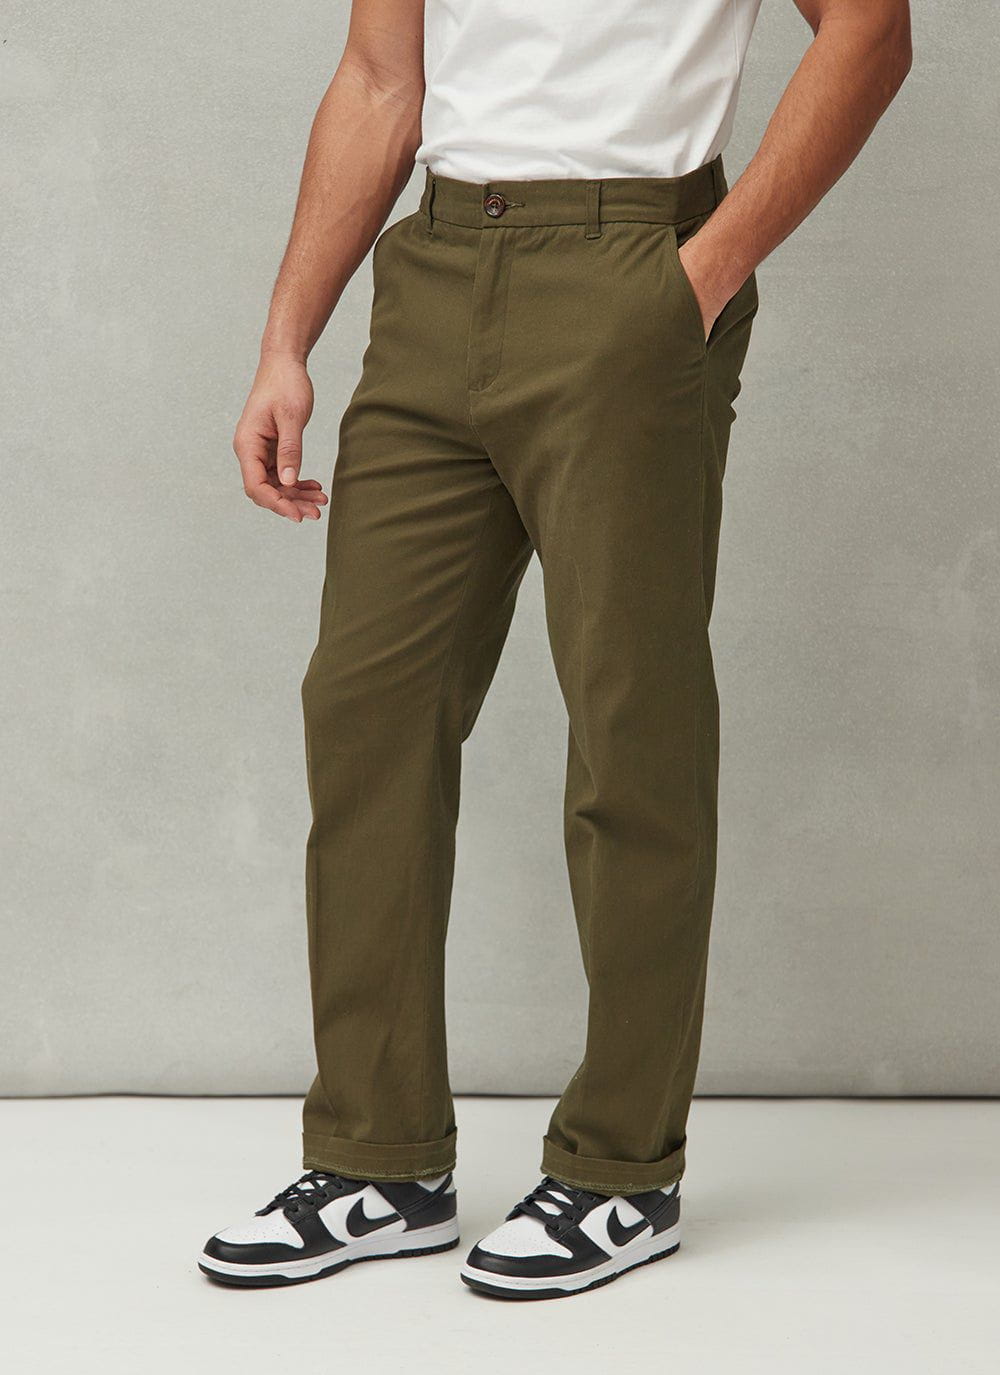 Military Green Trousers - Buy Military Green Trousers online in India